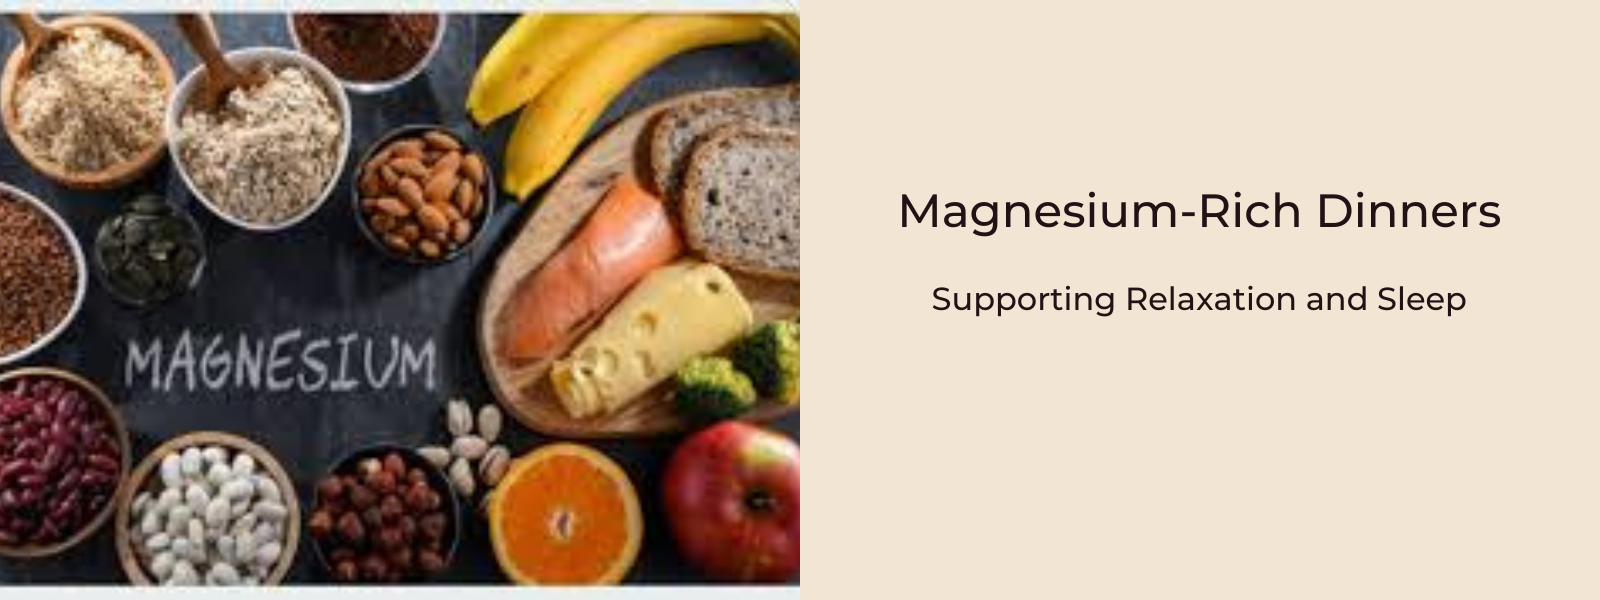 Magnesium-Rich Dinners: Supporting Relaxation and Sleep